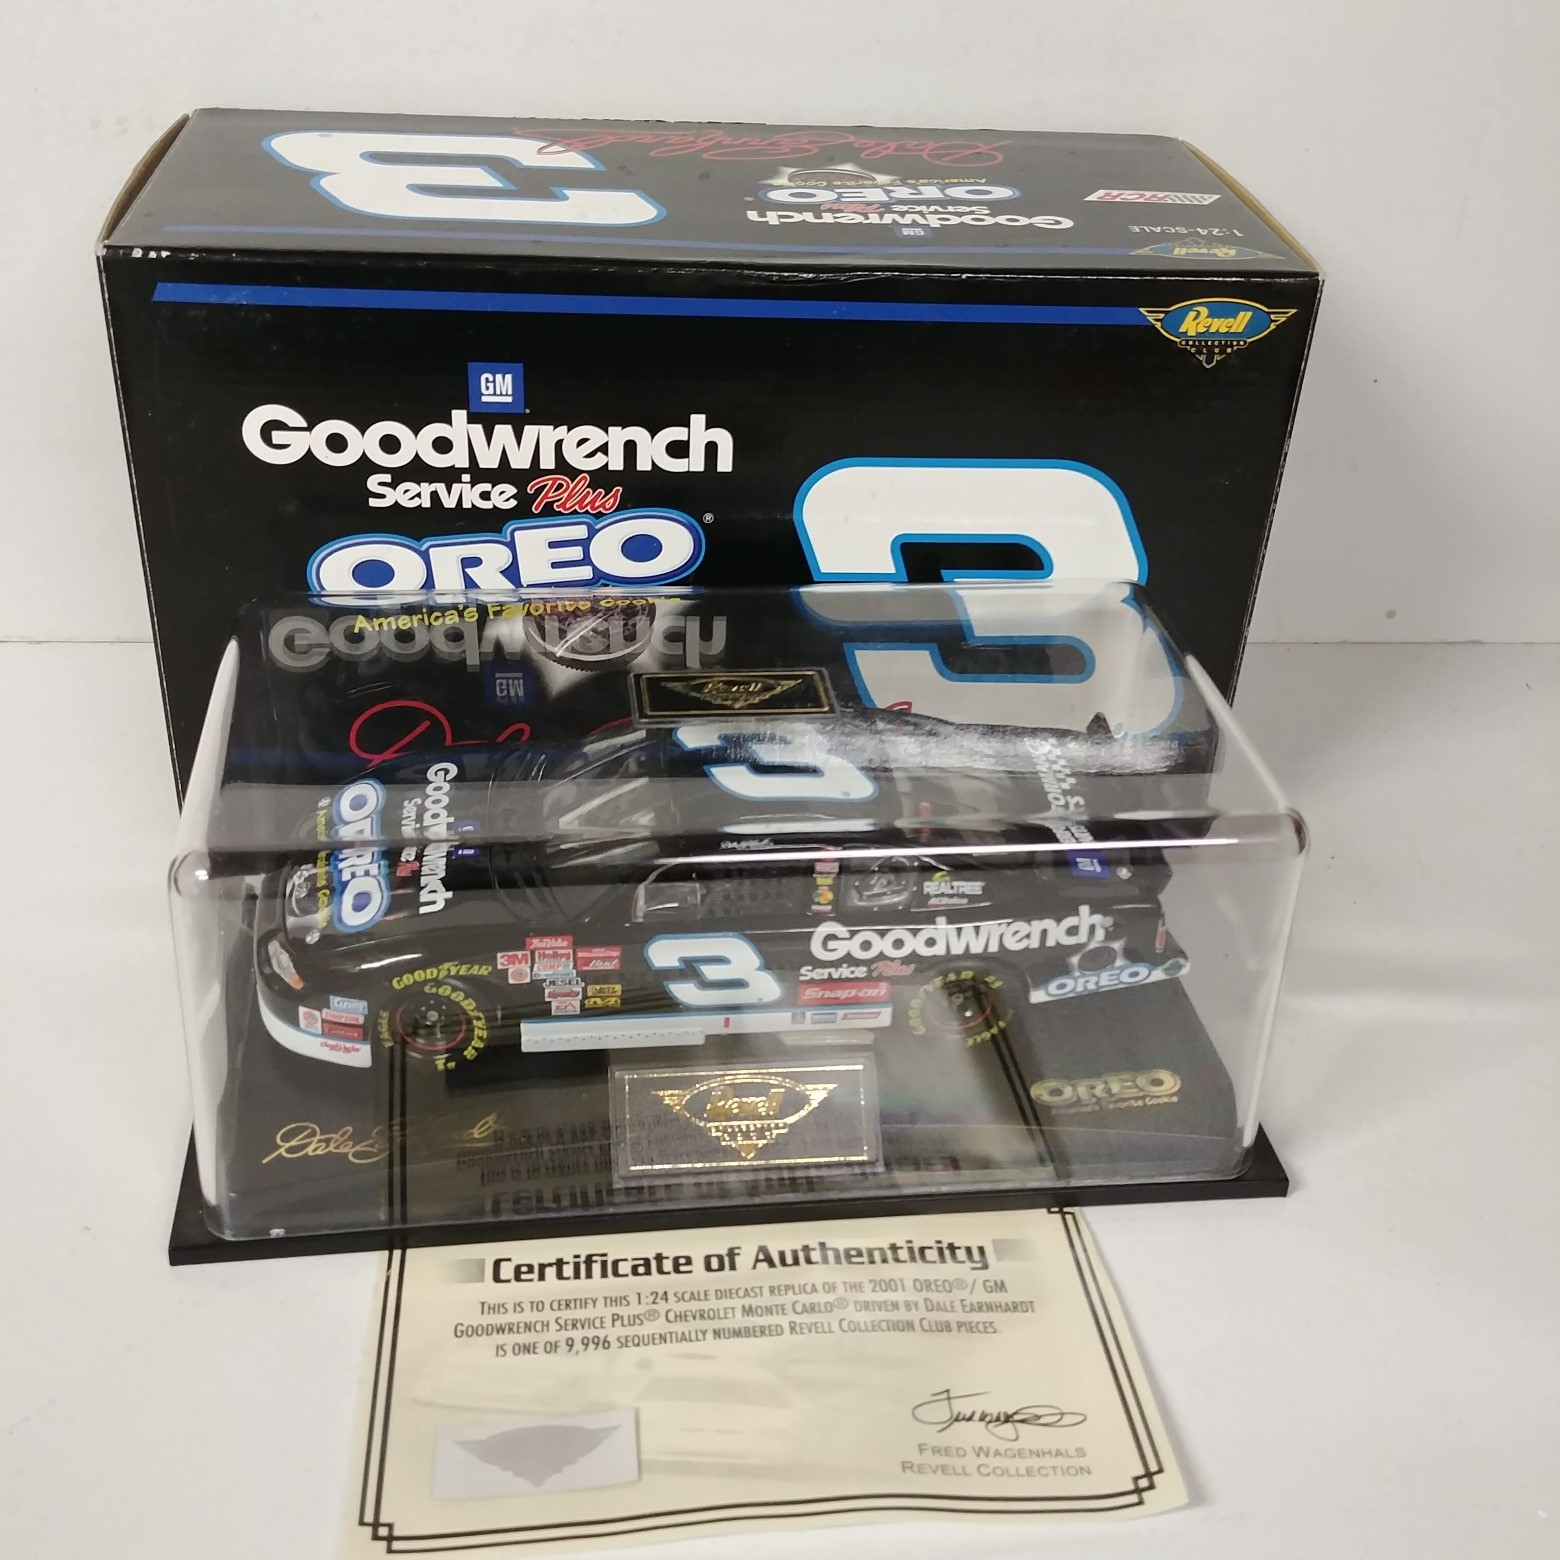 2001 Dale Earnhardt 1/24th GM Goodwrench "Oreo""Budweiser Shootout" Monte Carlo